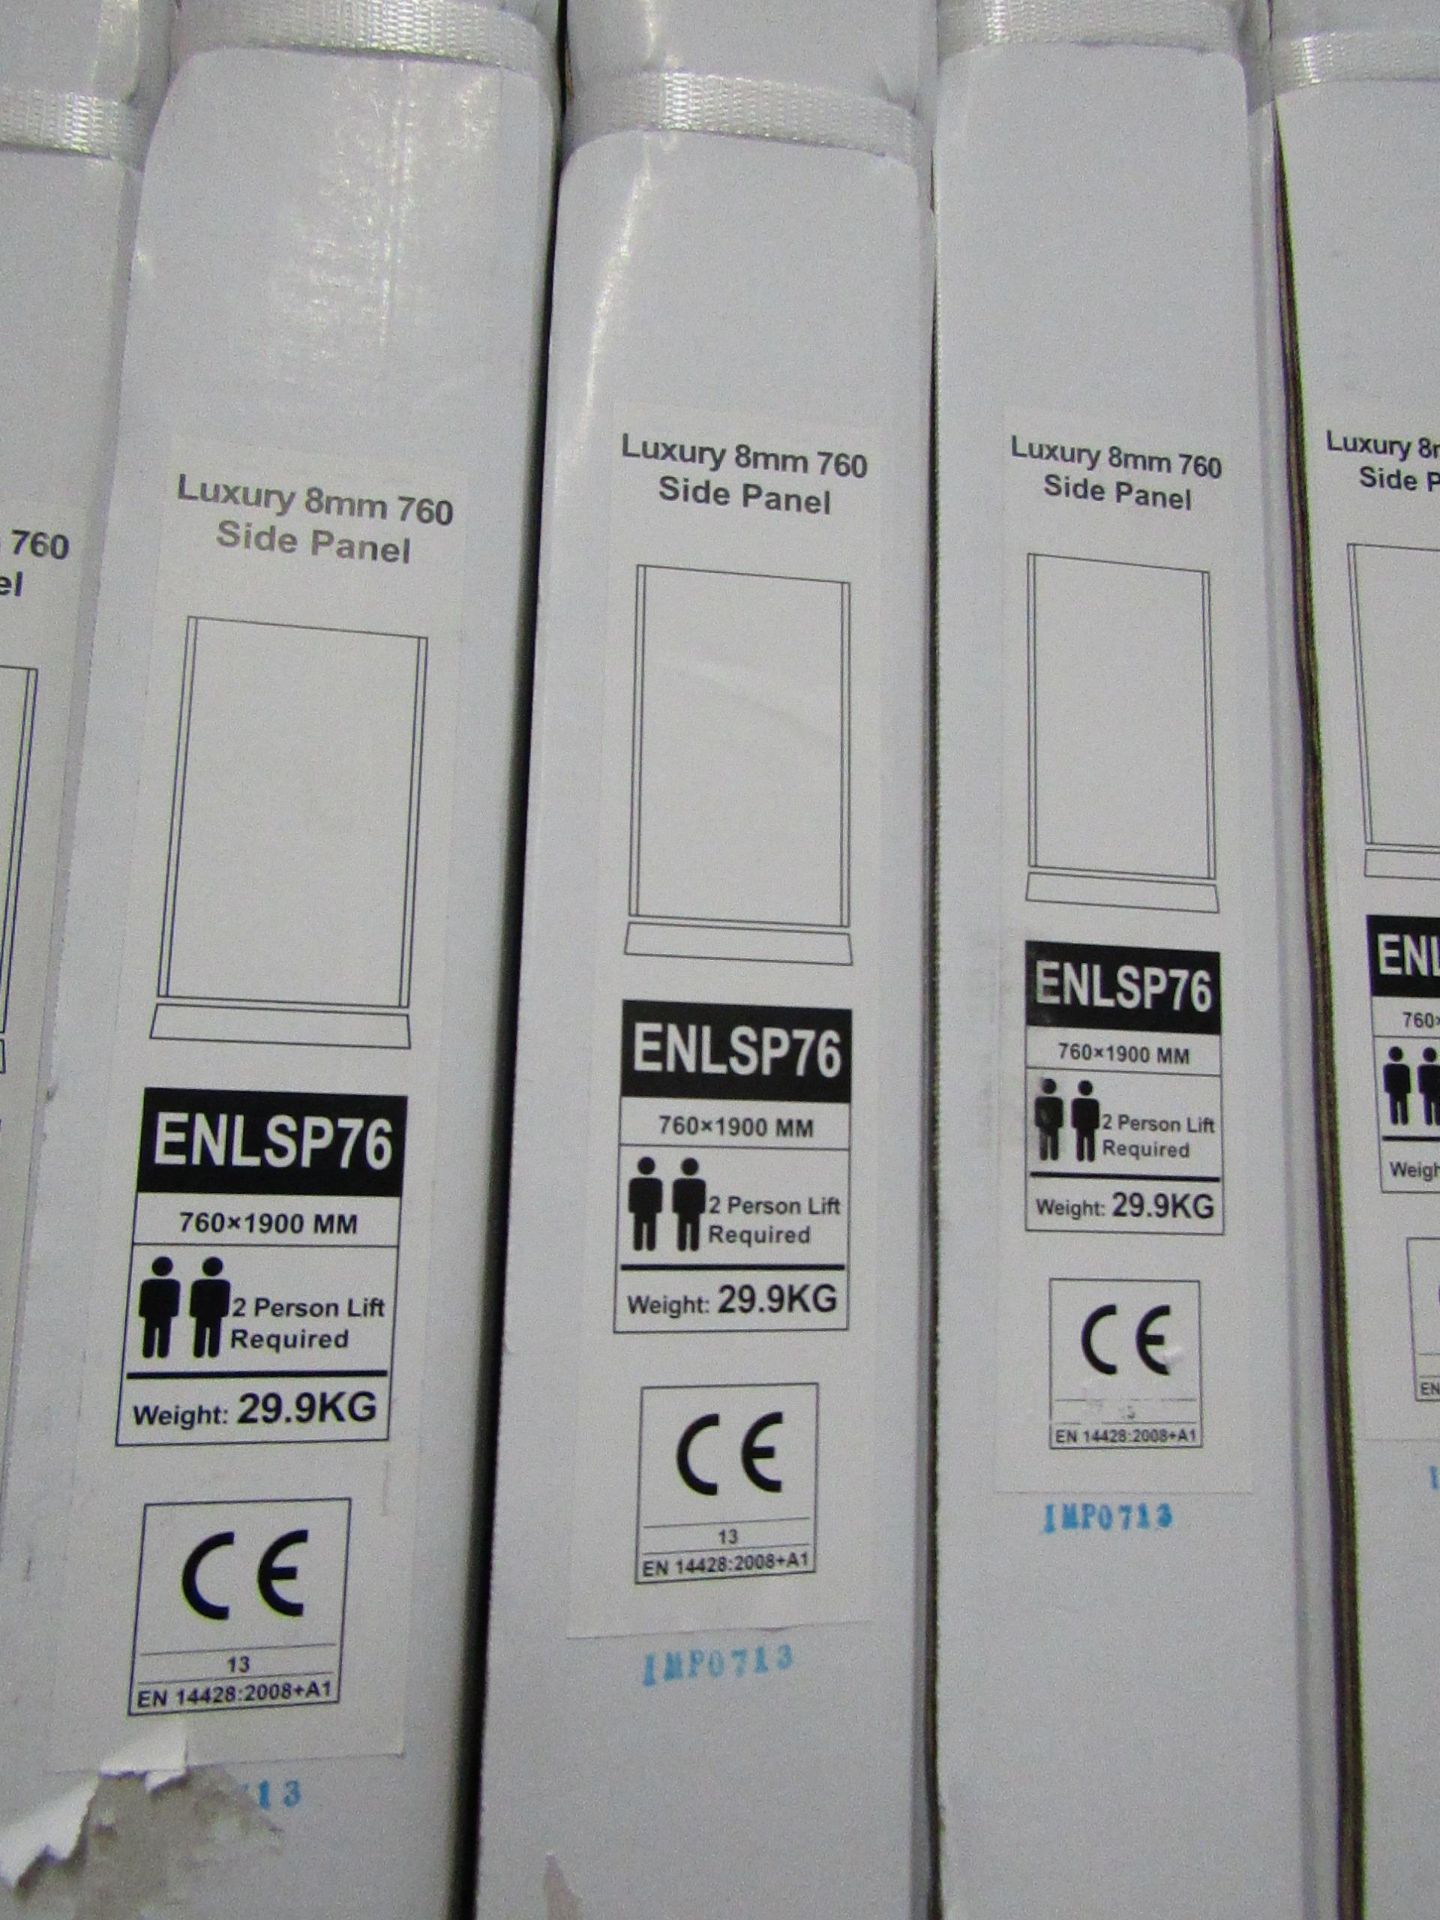 Luxury 8mm 760 side panel ENLSP76, new and boxed. RRP œ143